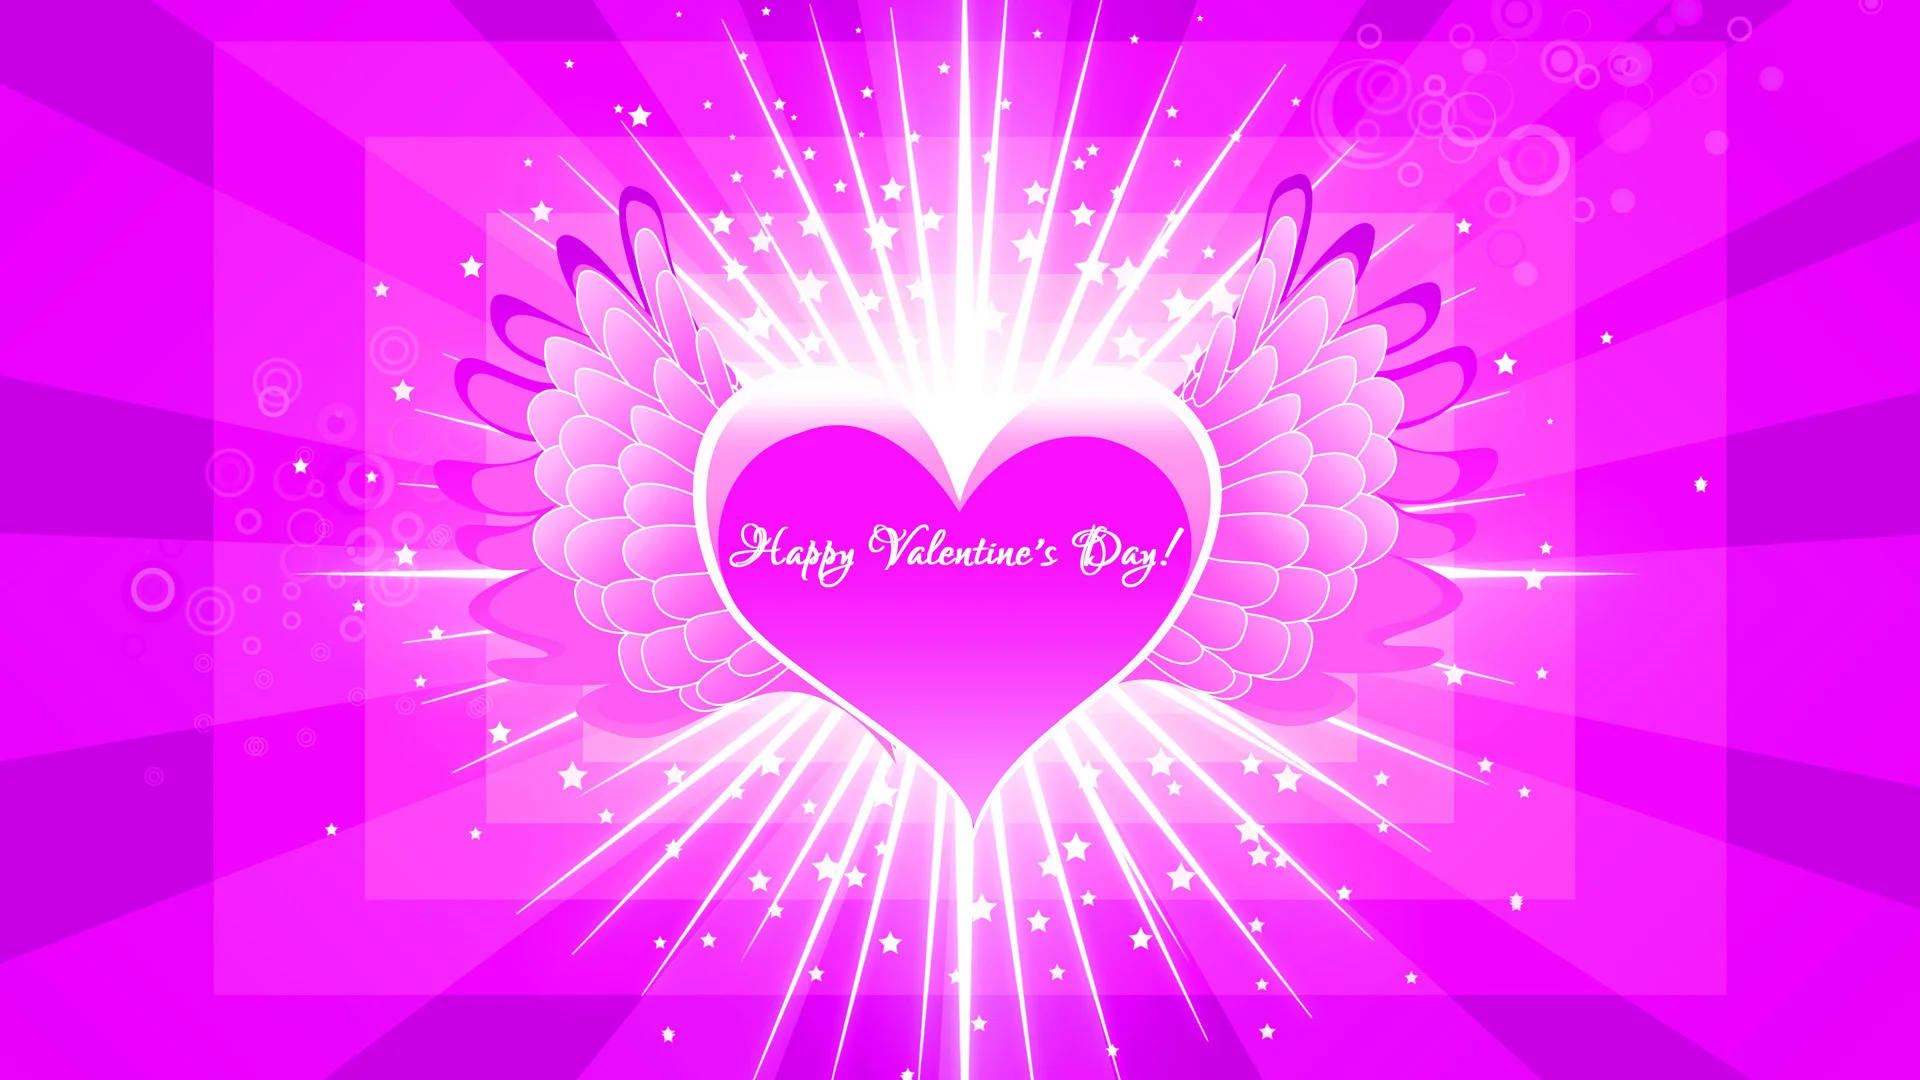 Valentine Day Images Pictures Wallpapers Free Download 19201080 Happy valentines day wallpaper free